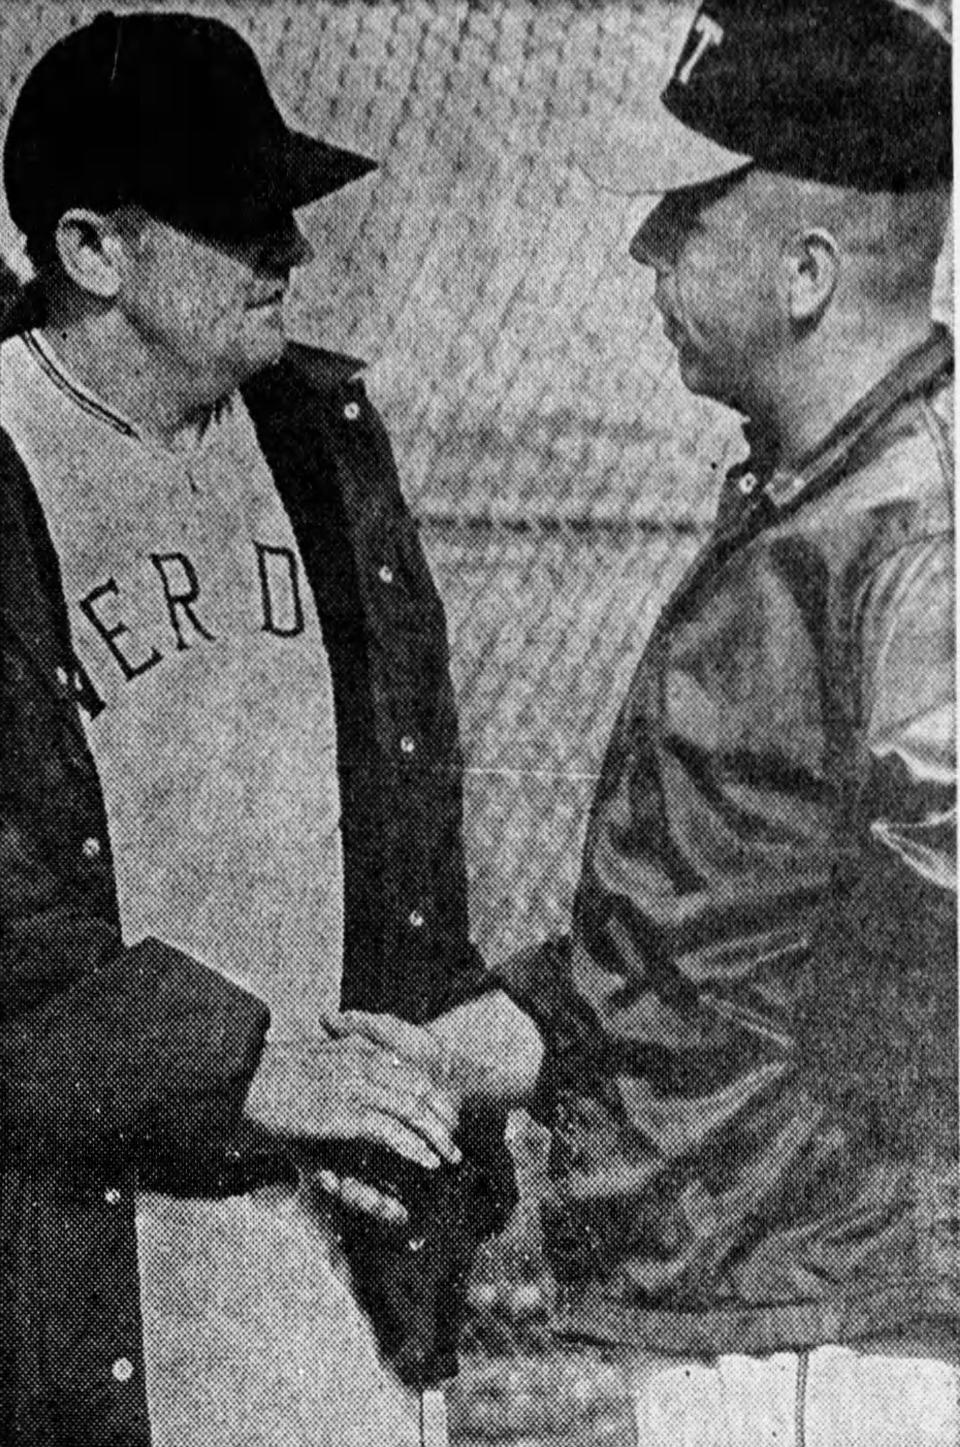 GOOD GOING—Old Tappan coach Ralph Cobb, right, offers his congratulations to Charlie Housley after River Dell win. Originally published Tuesday, June 9, 1970. River Dell wins Group 3, North Jersey, Section 1 baseball title, 7-0.